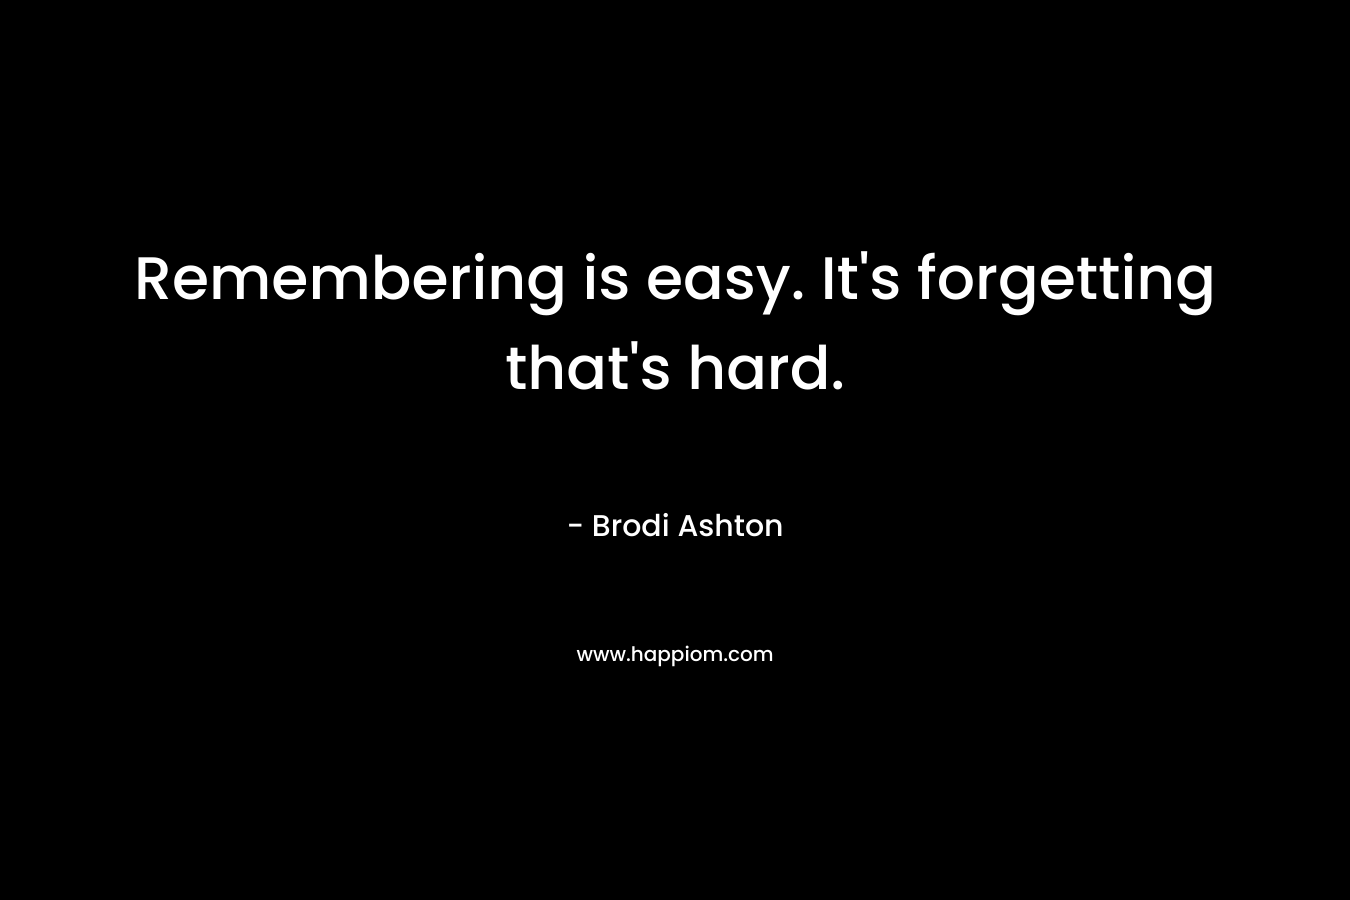 Remembering is easy. It’s forgetting that’s hard. – Brodi Ashton